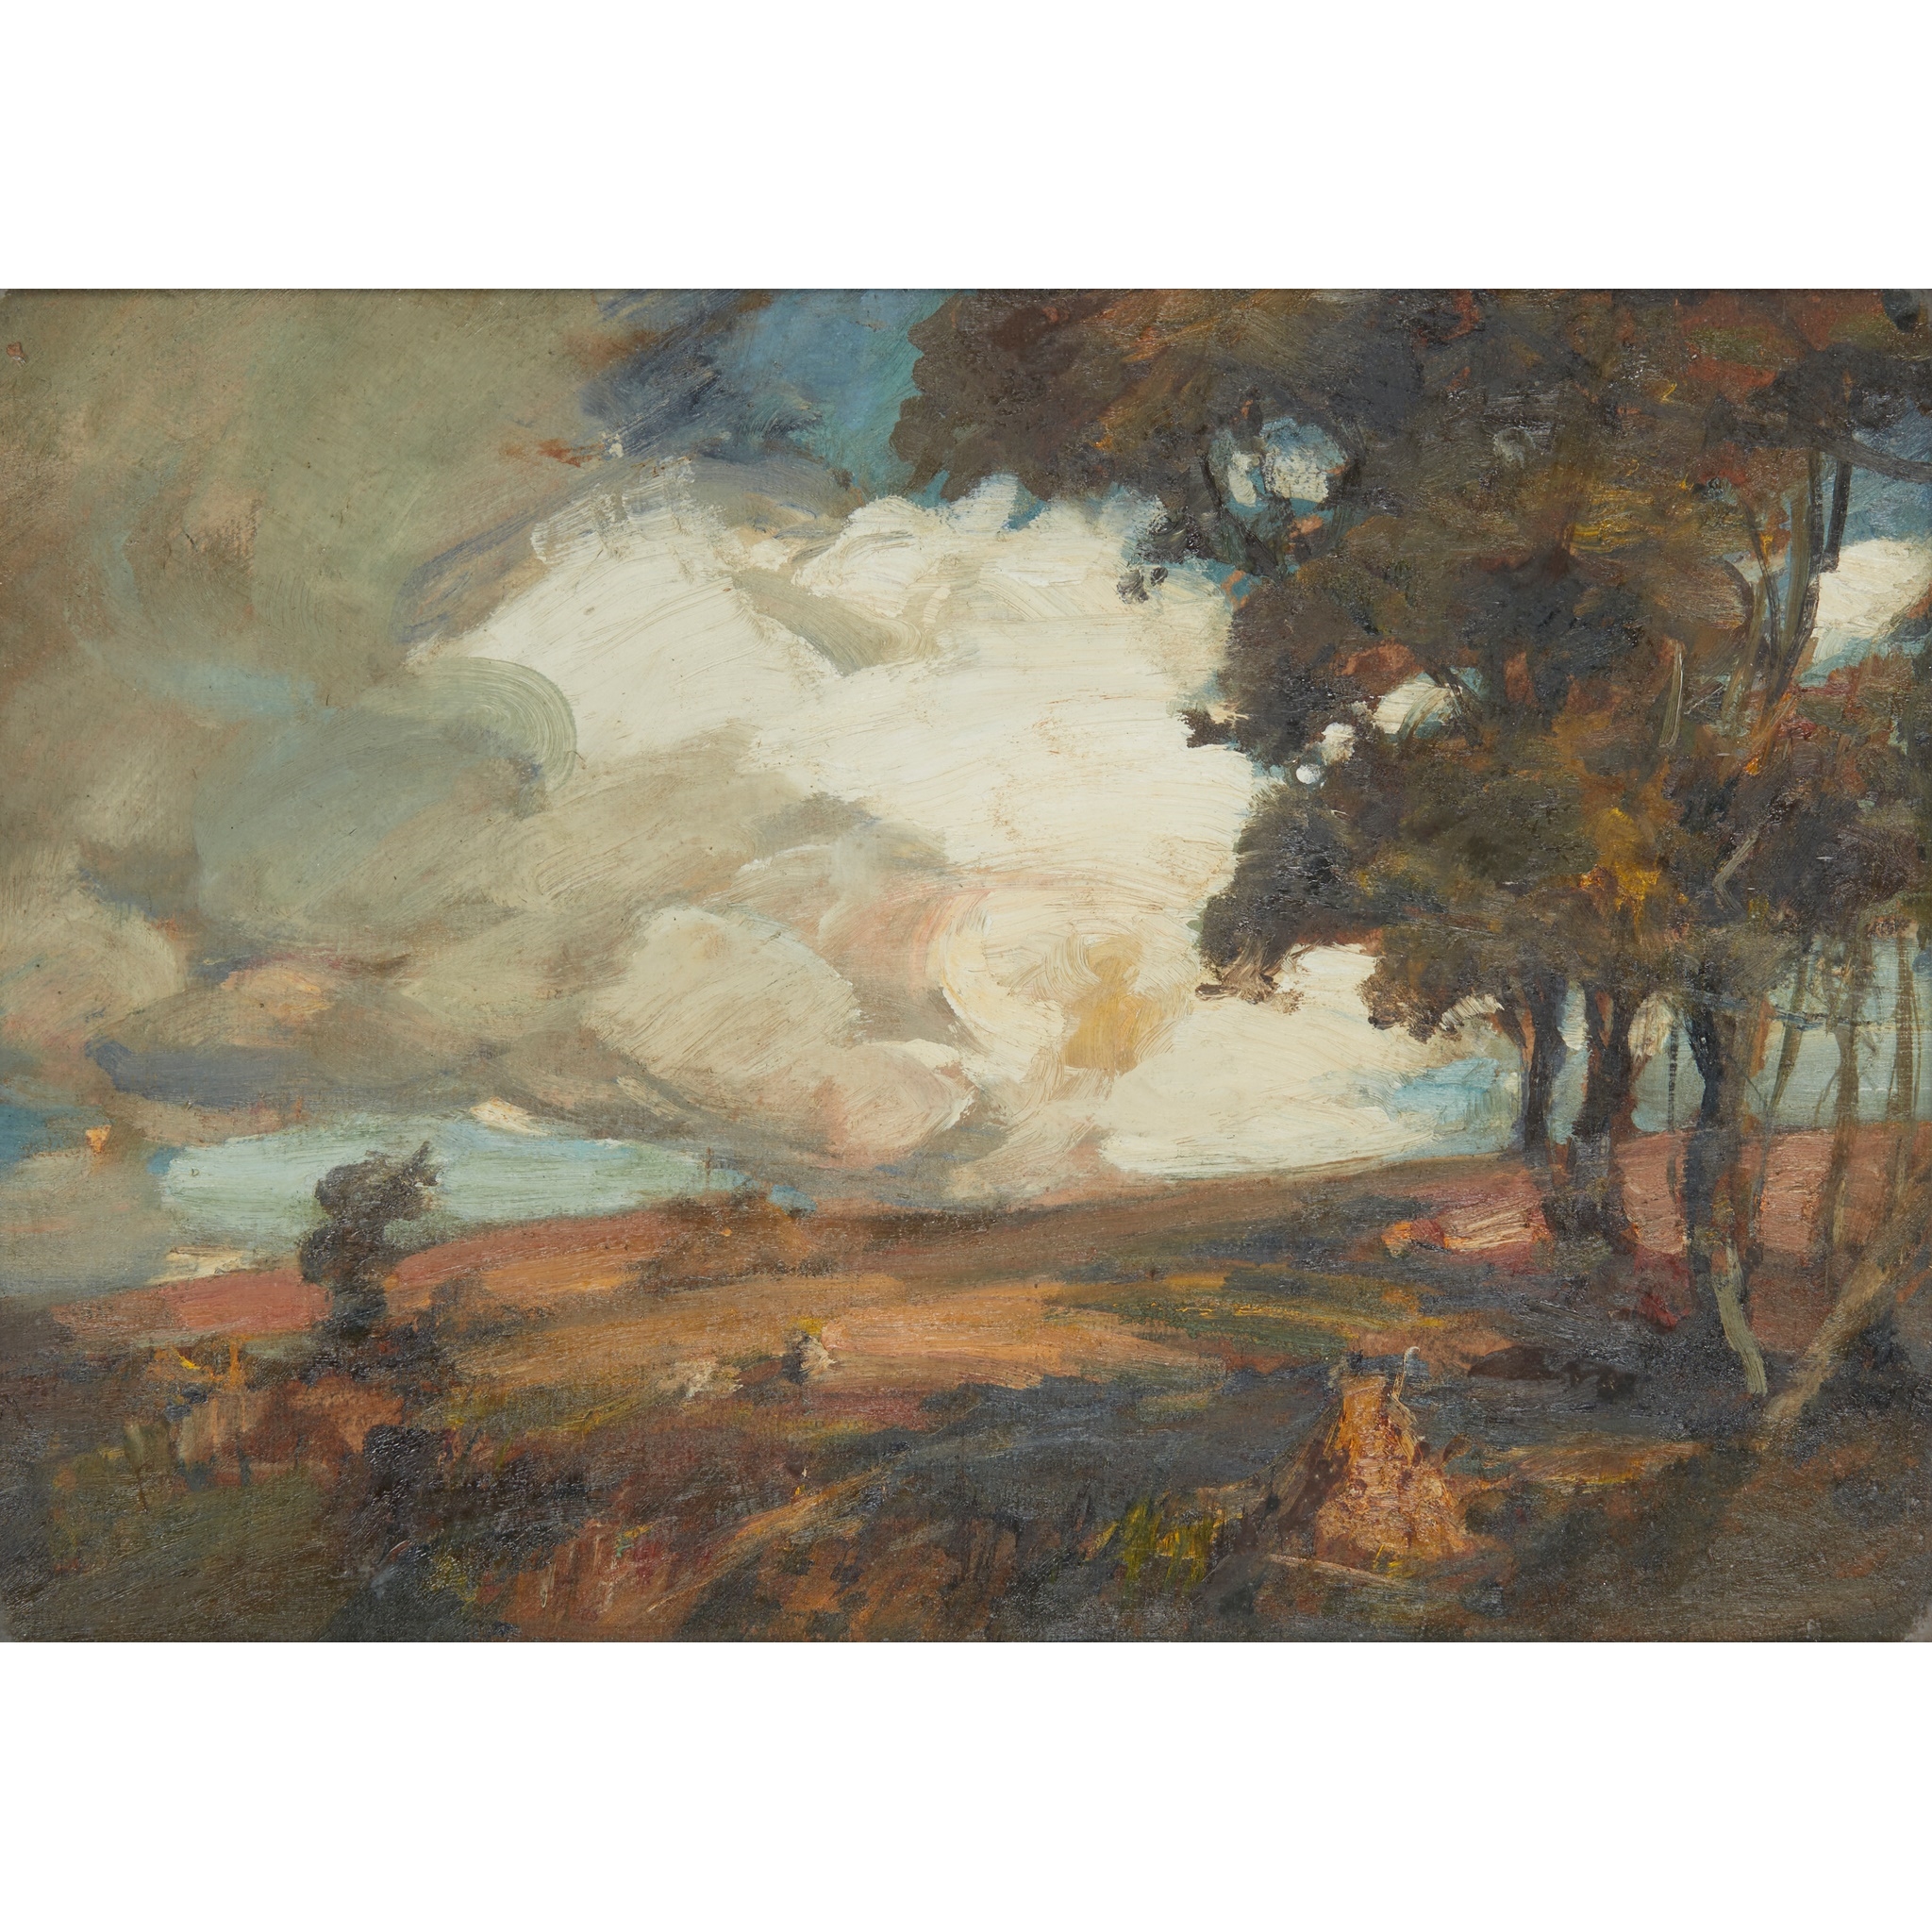 Artwork by James Campbell Noble, A BLUSTERY DAY, Made of Oil on board